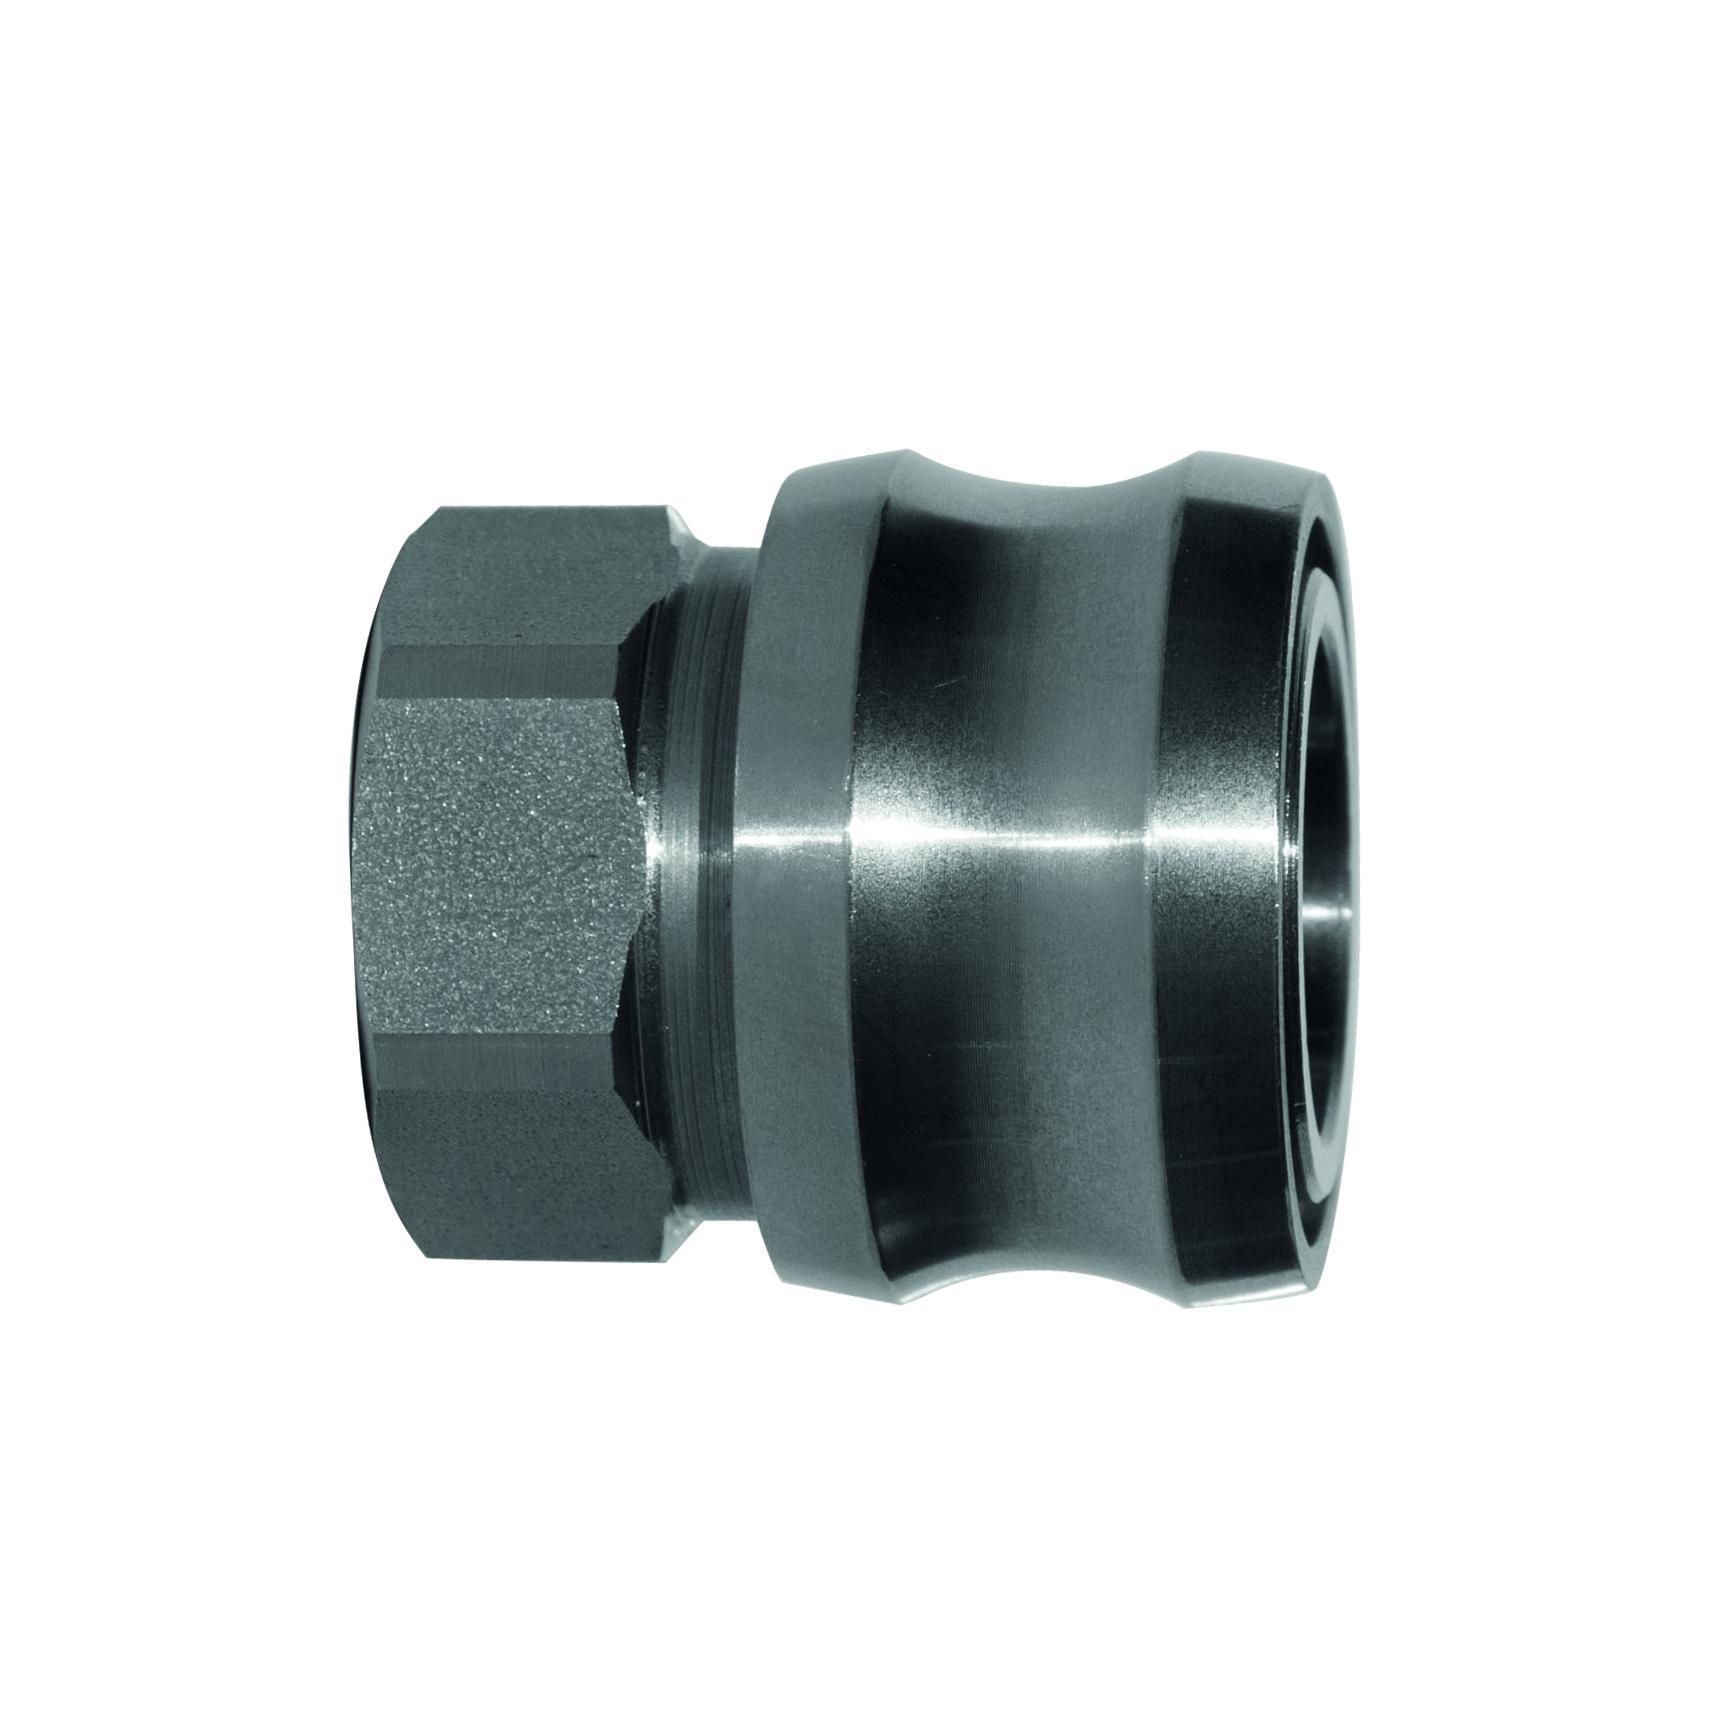 TEMA Type Quick Release Couplings